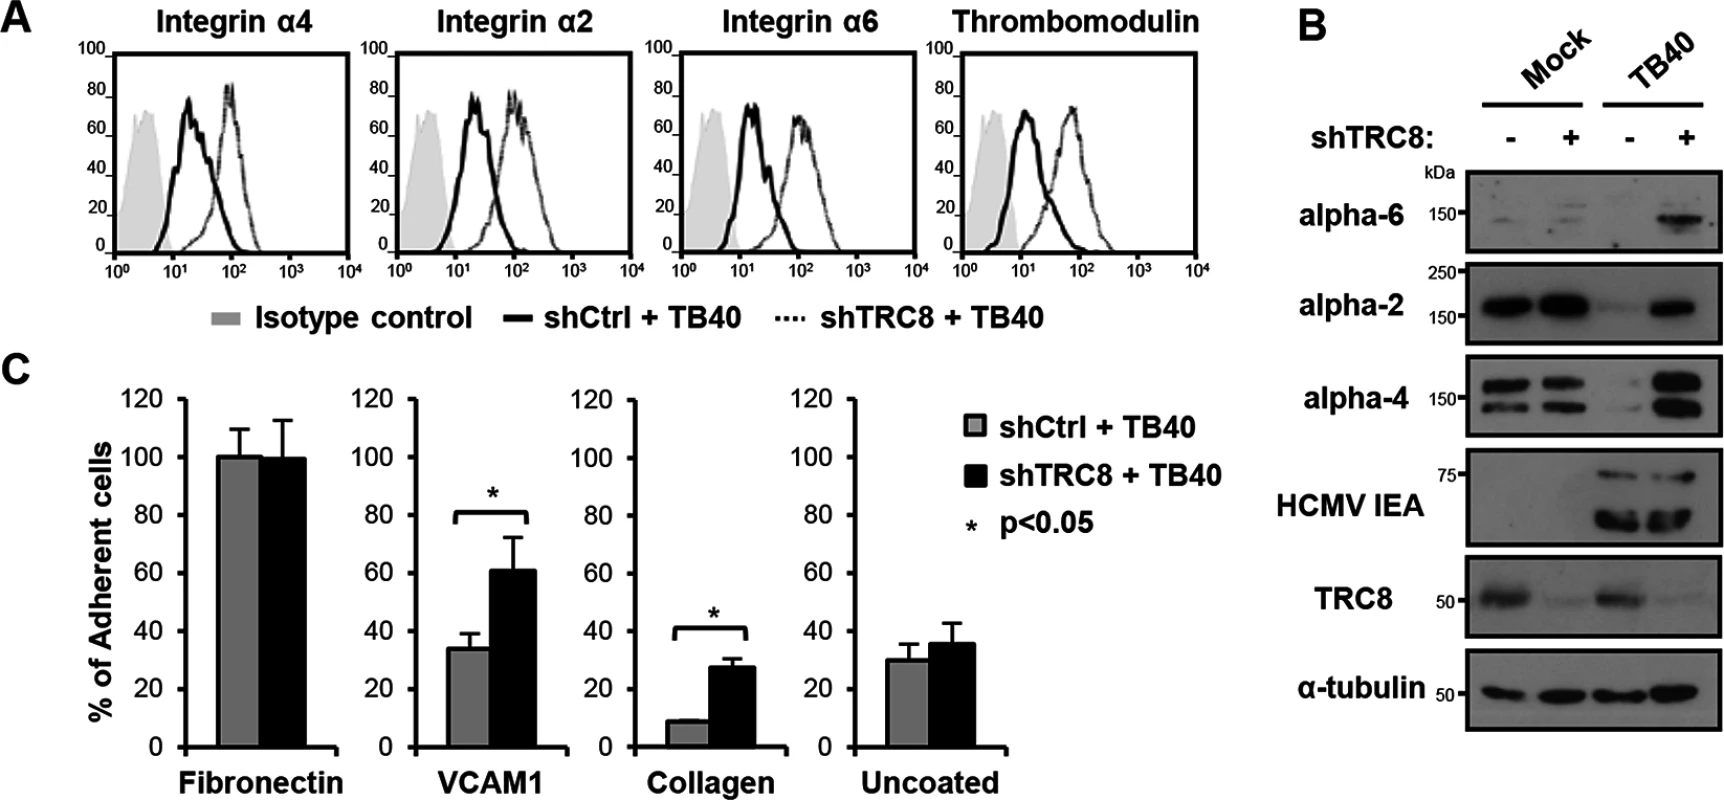 US2/TRC8-mediated degradation of α integrins reduces cell adhesion of lytically HCMV infected THP-1 cells.